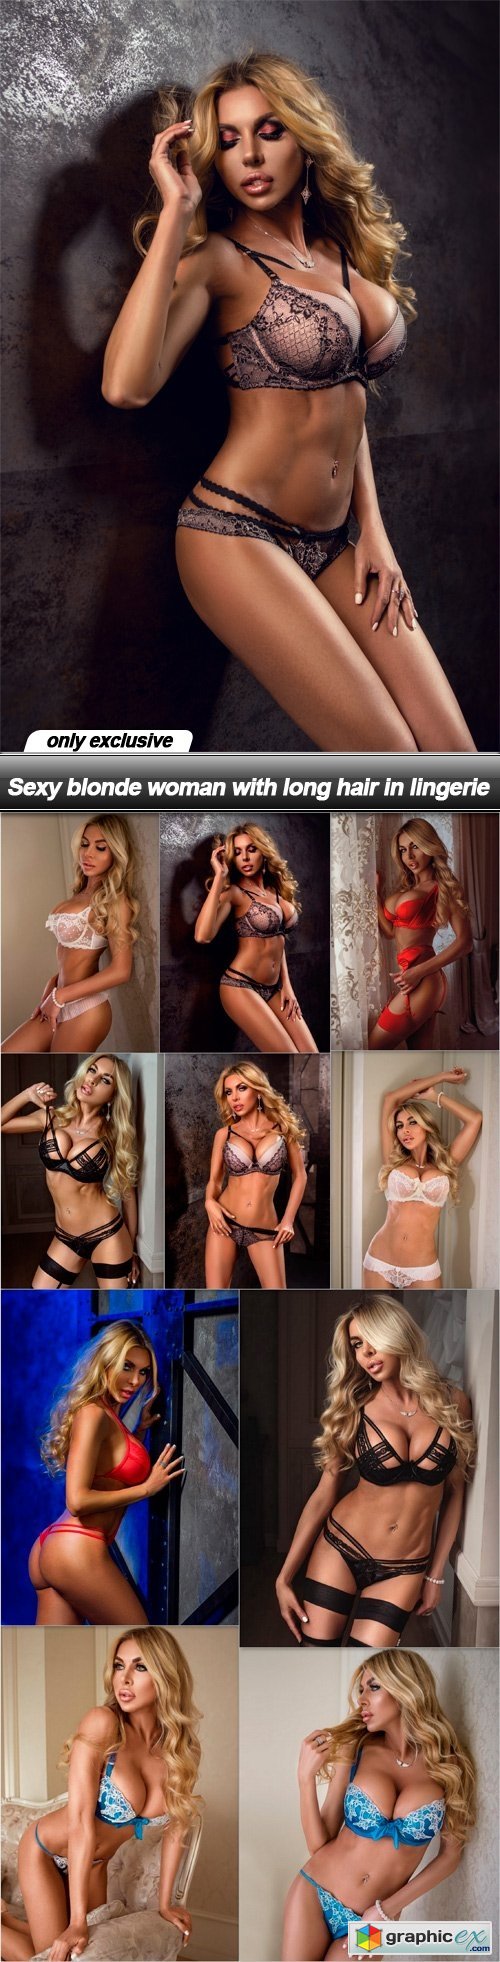 Sexy blonde woman with long hair in lingerie - 10 UHQ JPEG